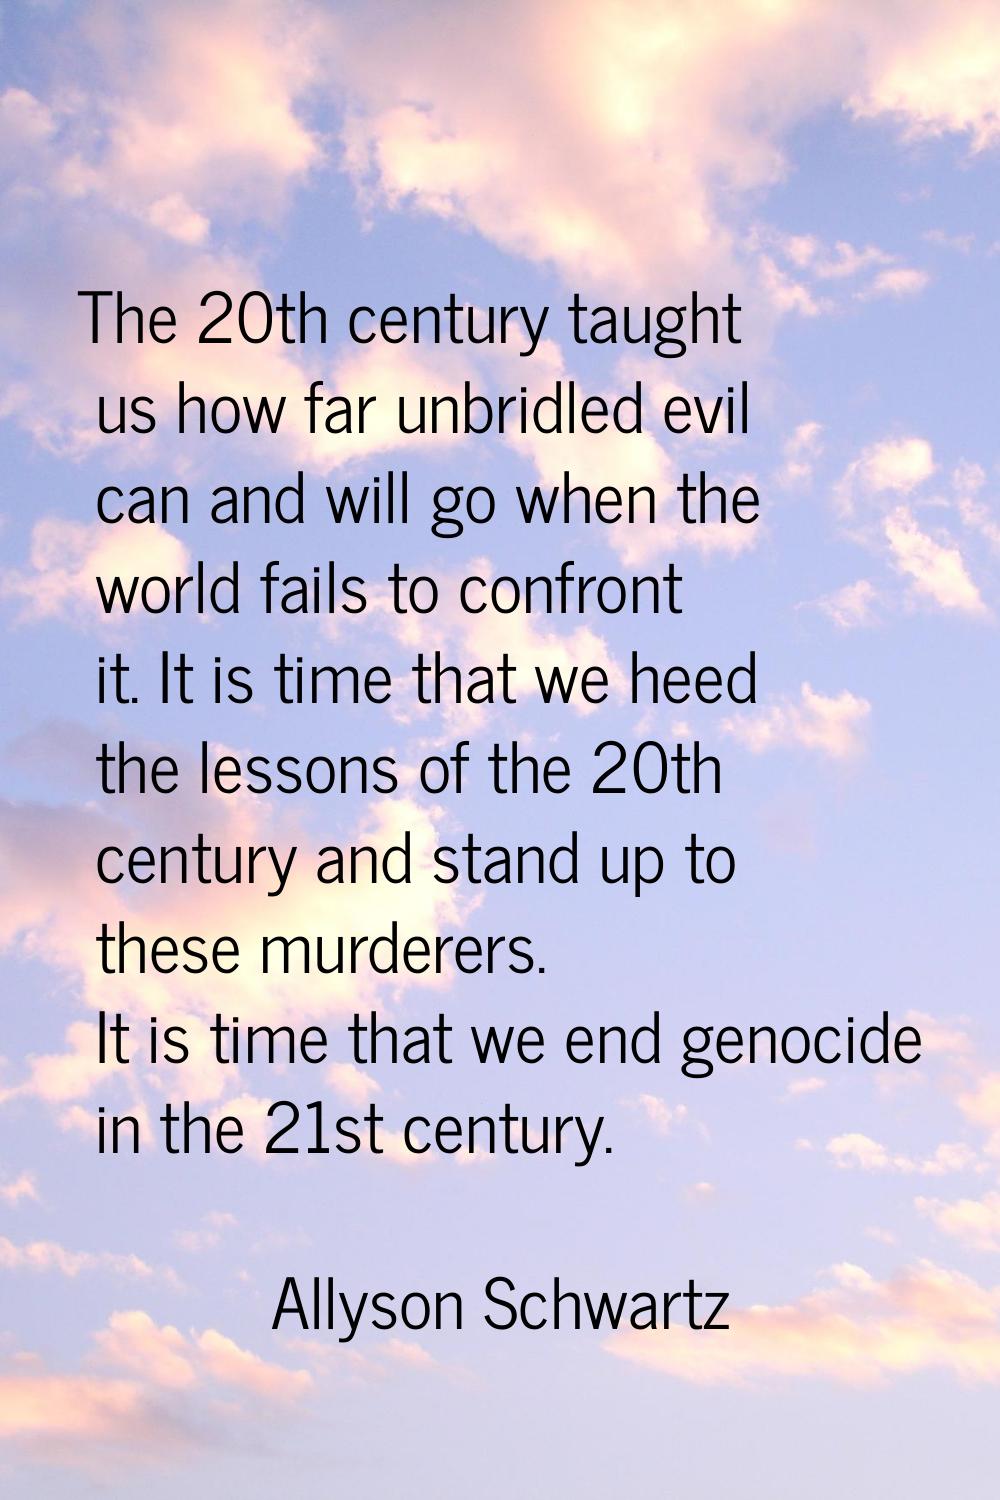 The 20th century taught us how far unbridled evil can and will go when the world fails to confront 